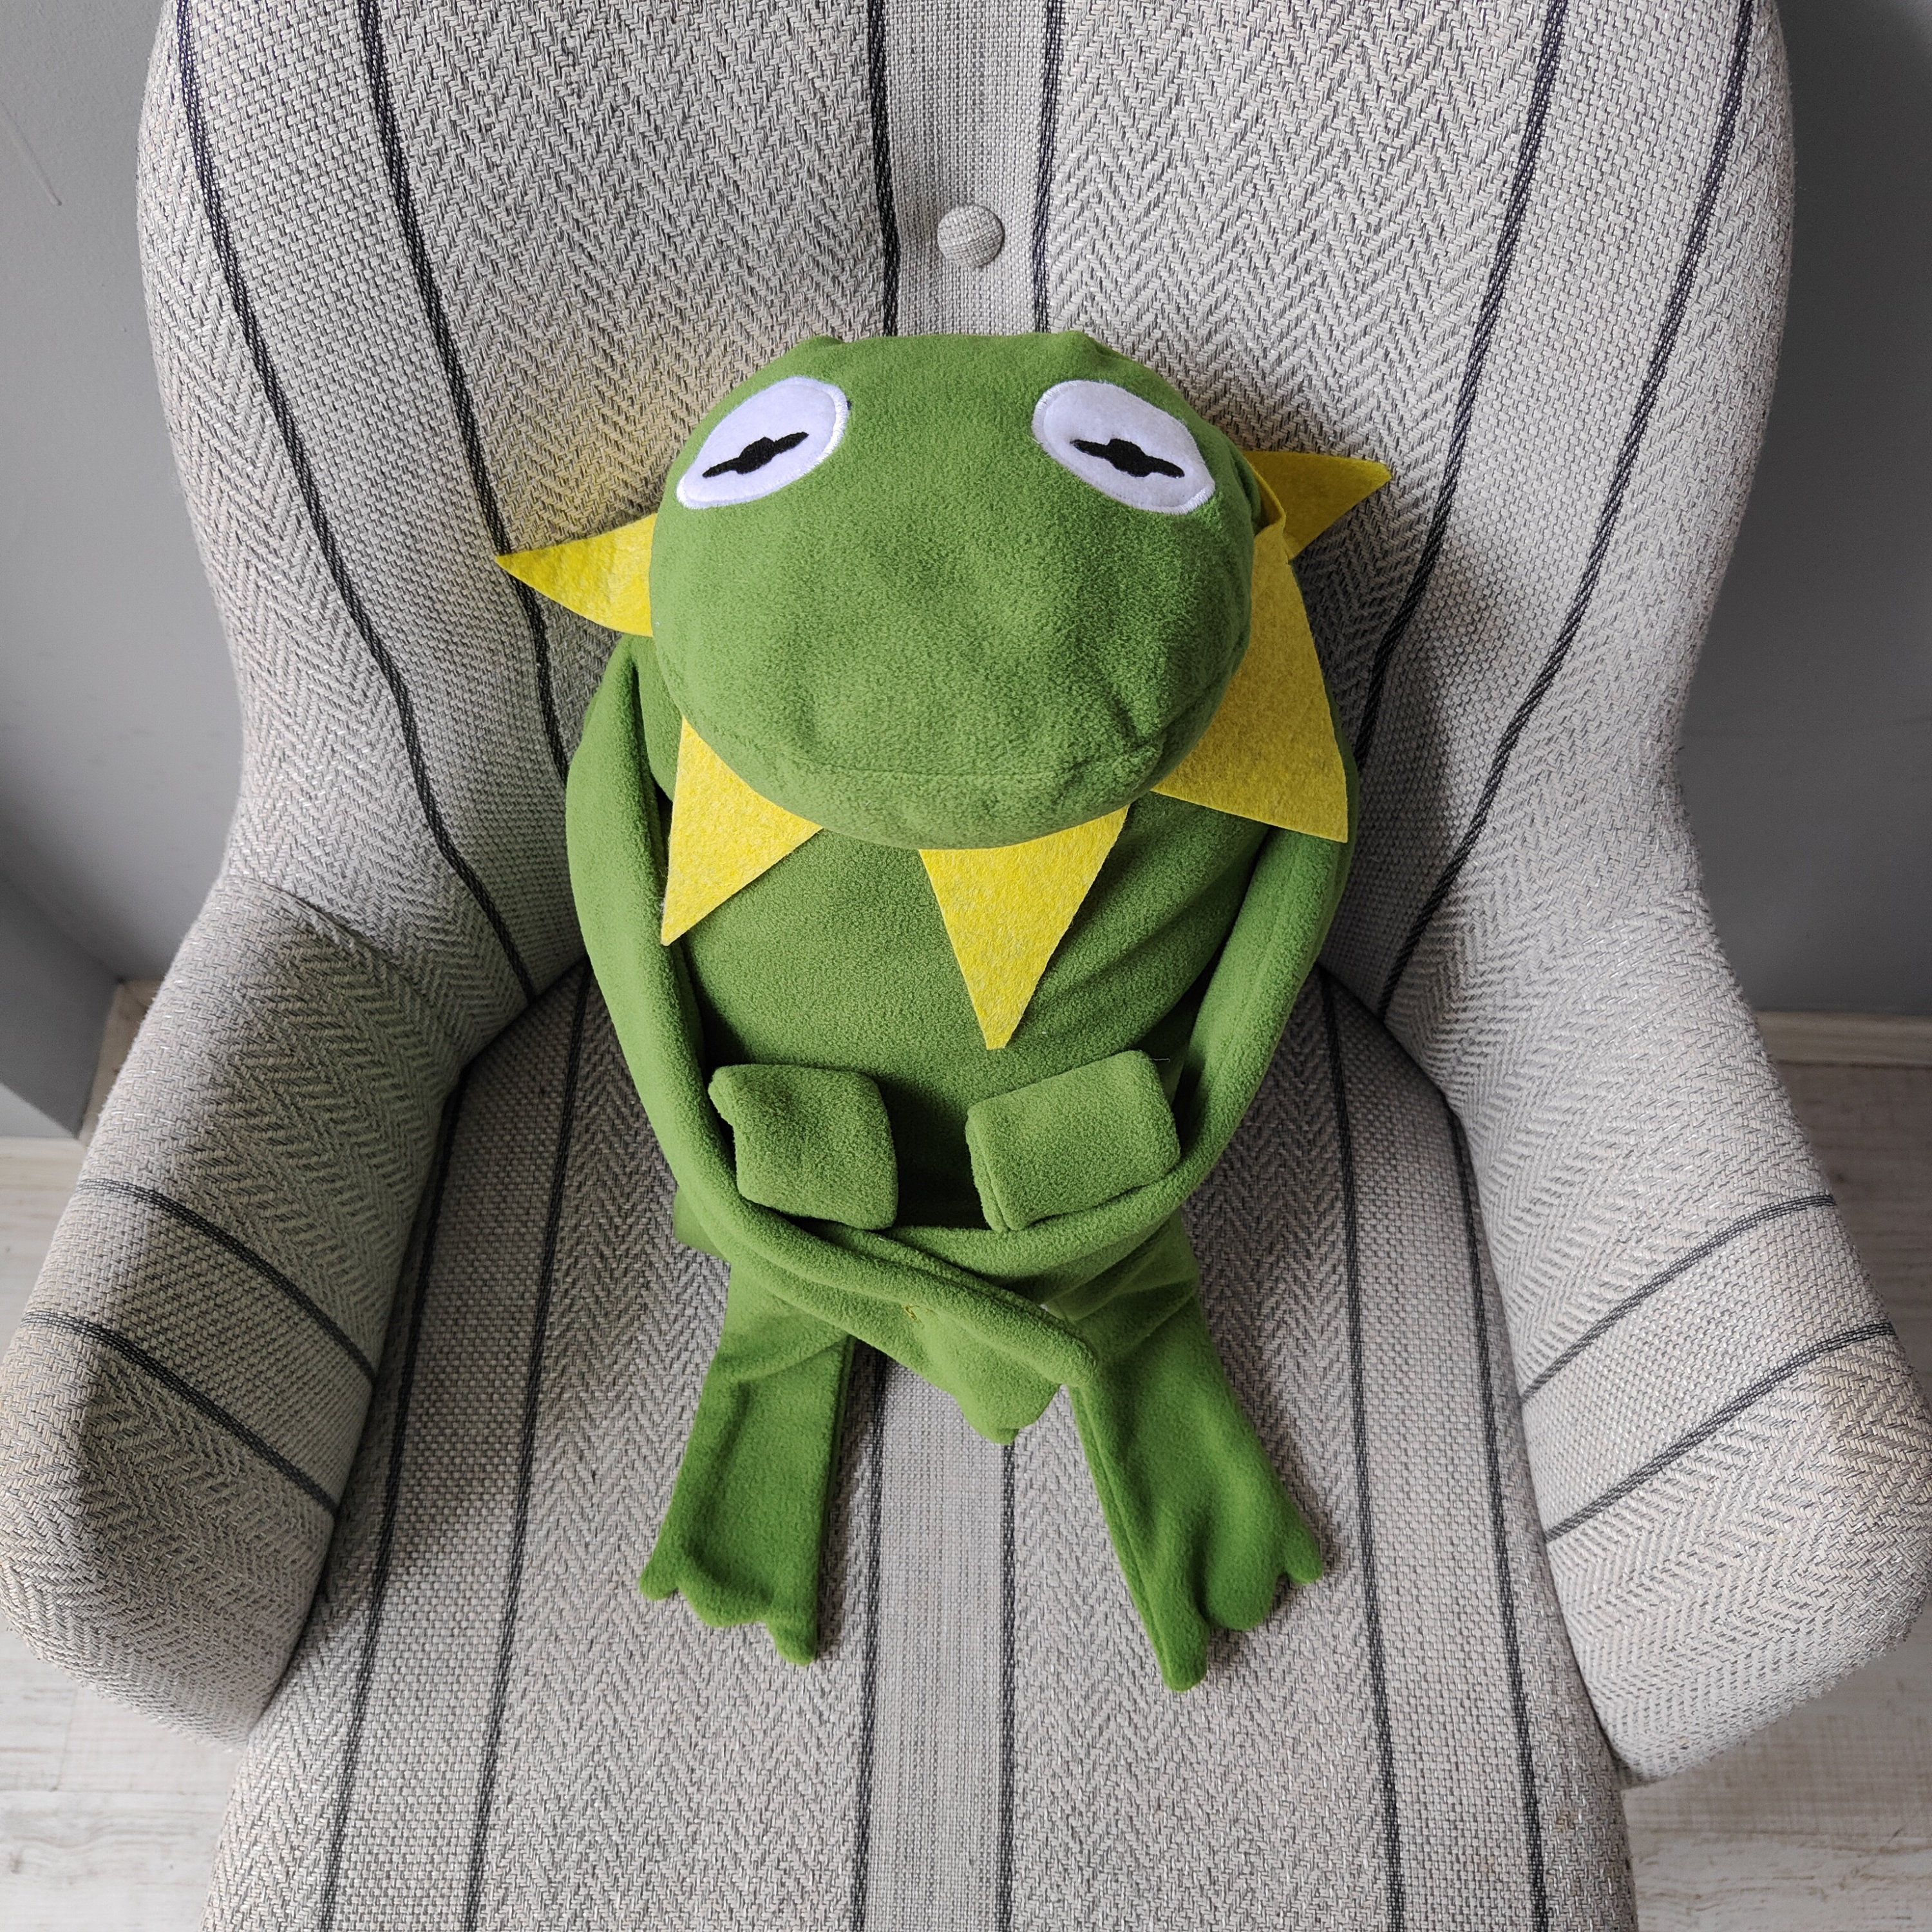 The Frog Pillow,soft Playmate Toy,stuffed Animals Plush,funny